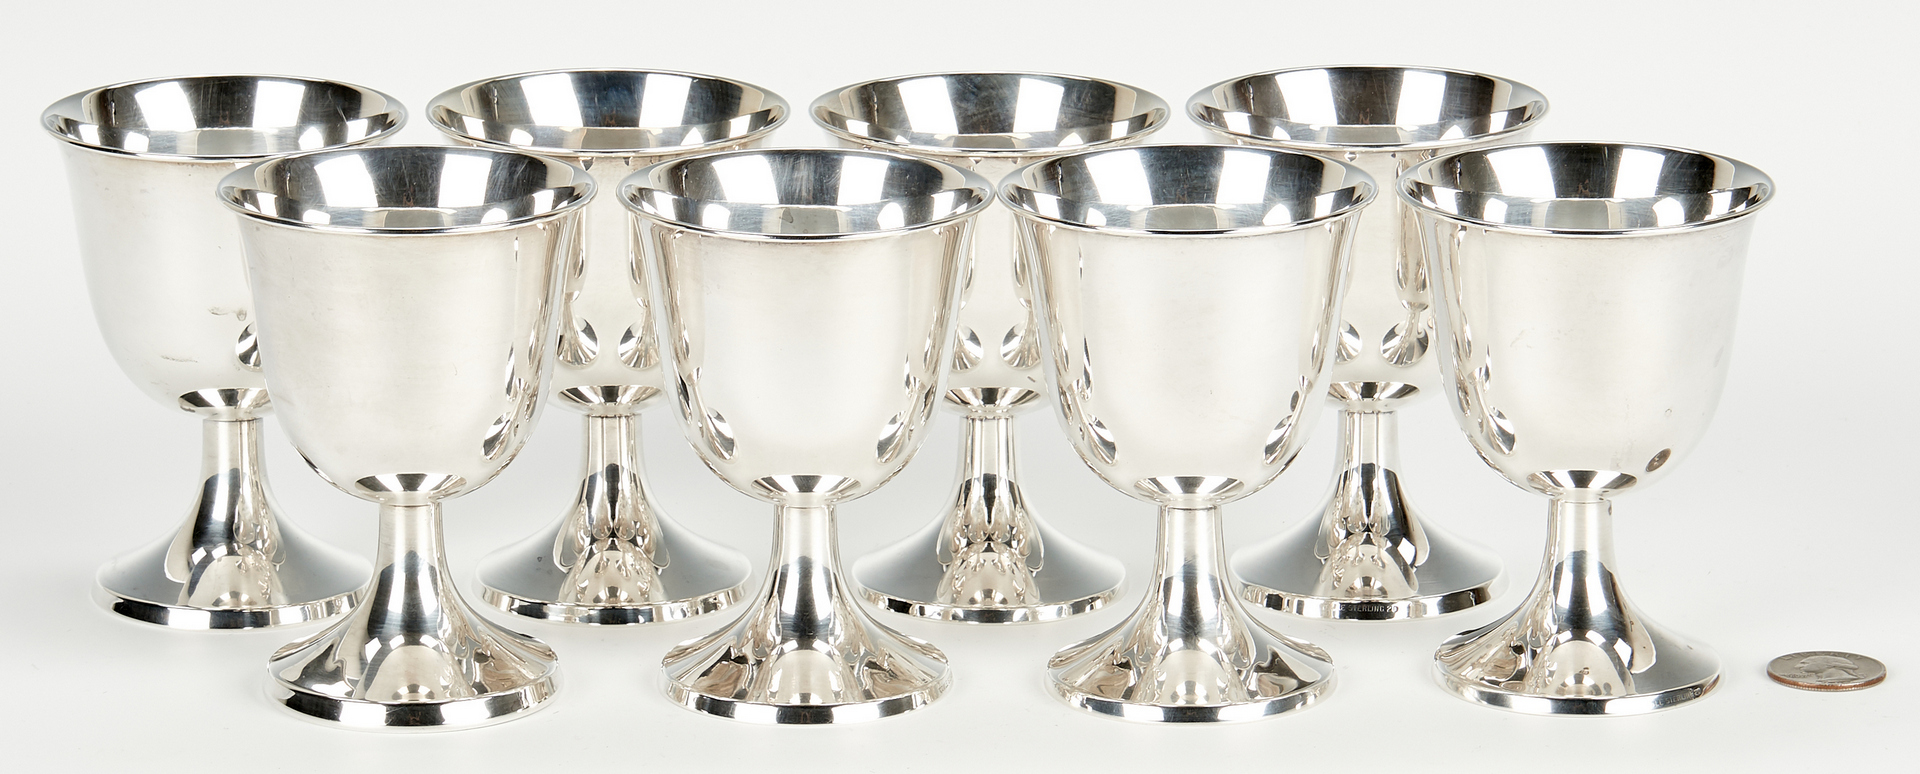 Lot 1036: 8 Towle Small Sterling Silver Wine Goblets